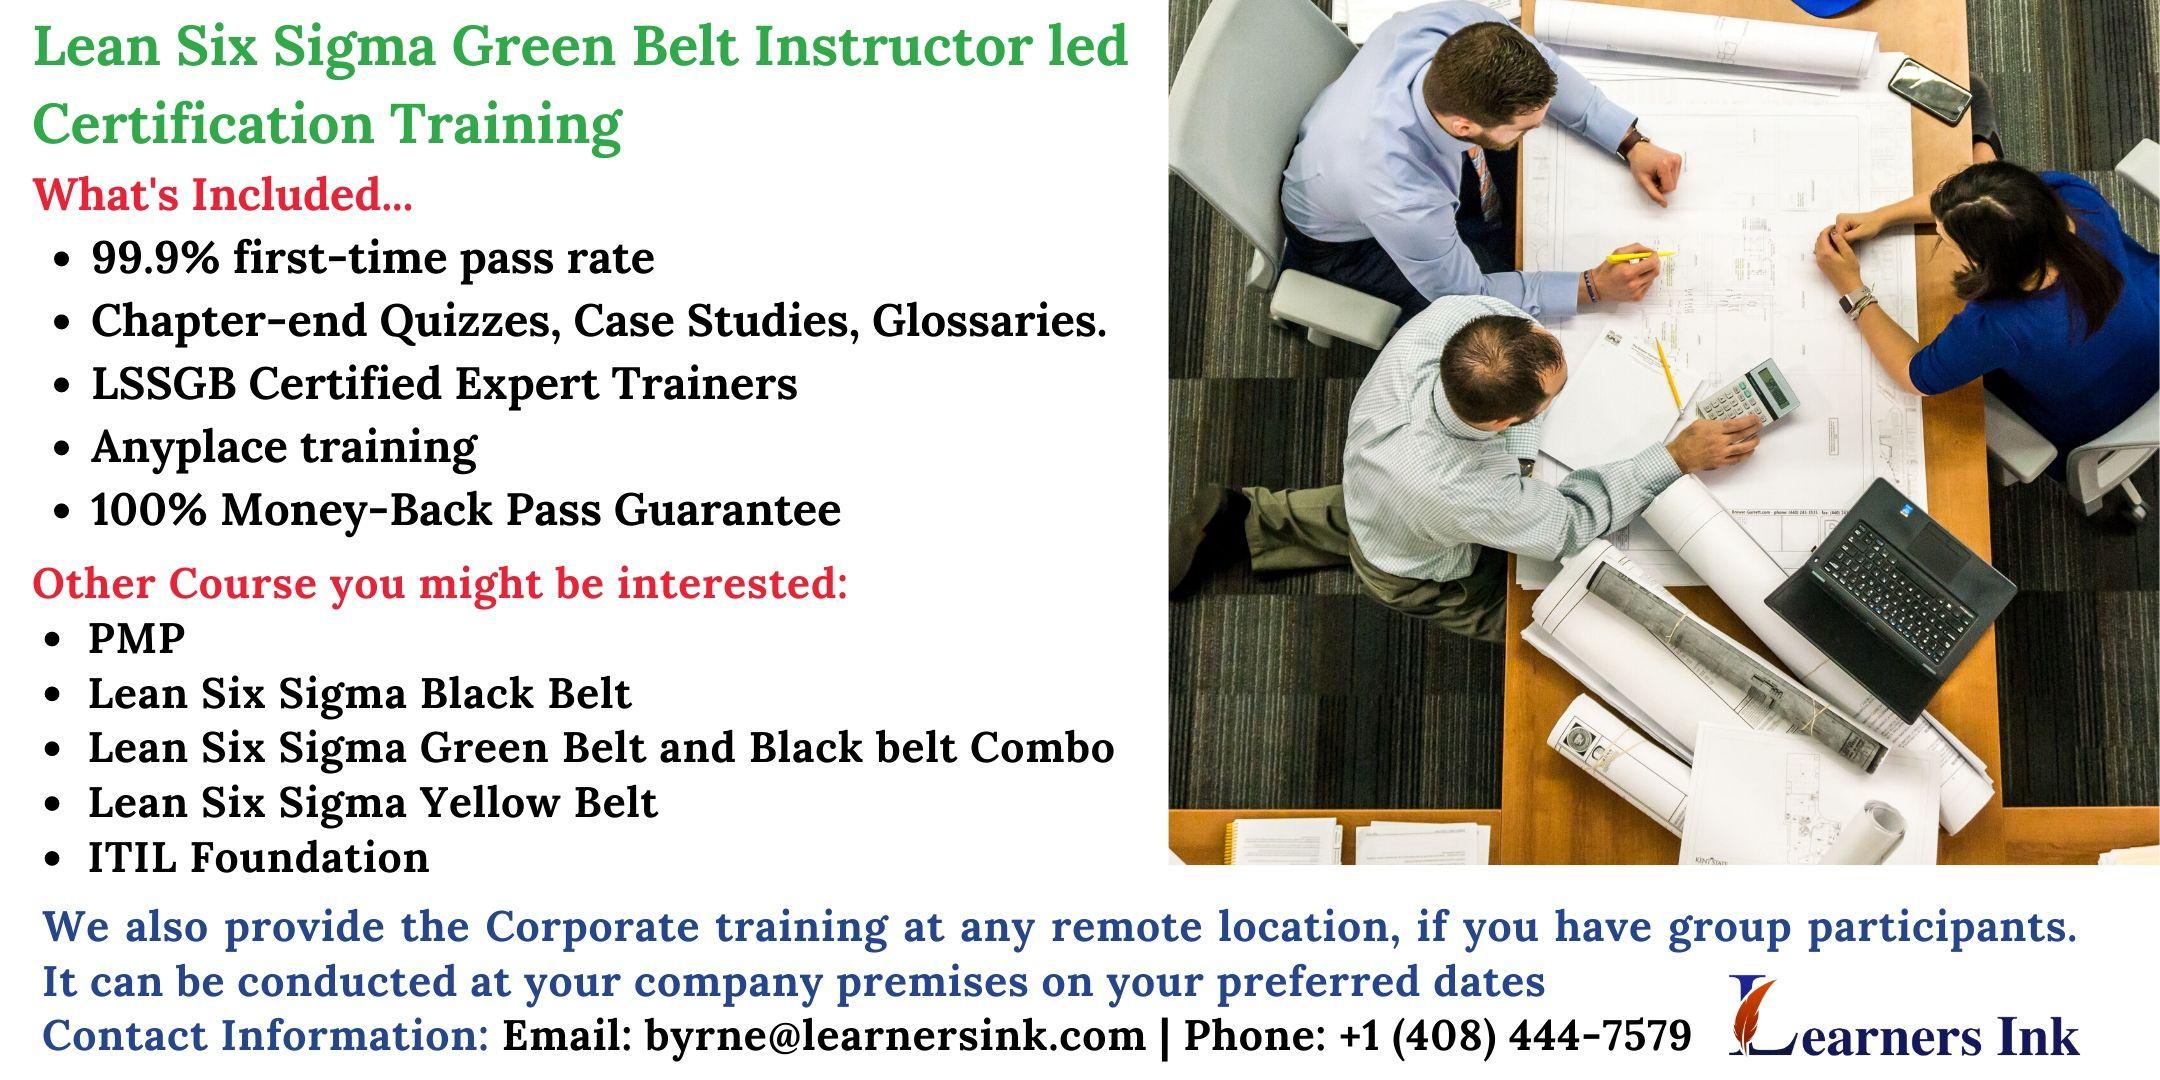 Lean Six Sigma Green Belt Certification Training Course (LSSGB) in Fresno